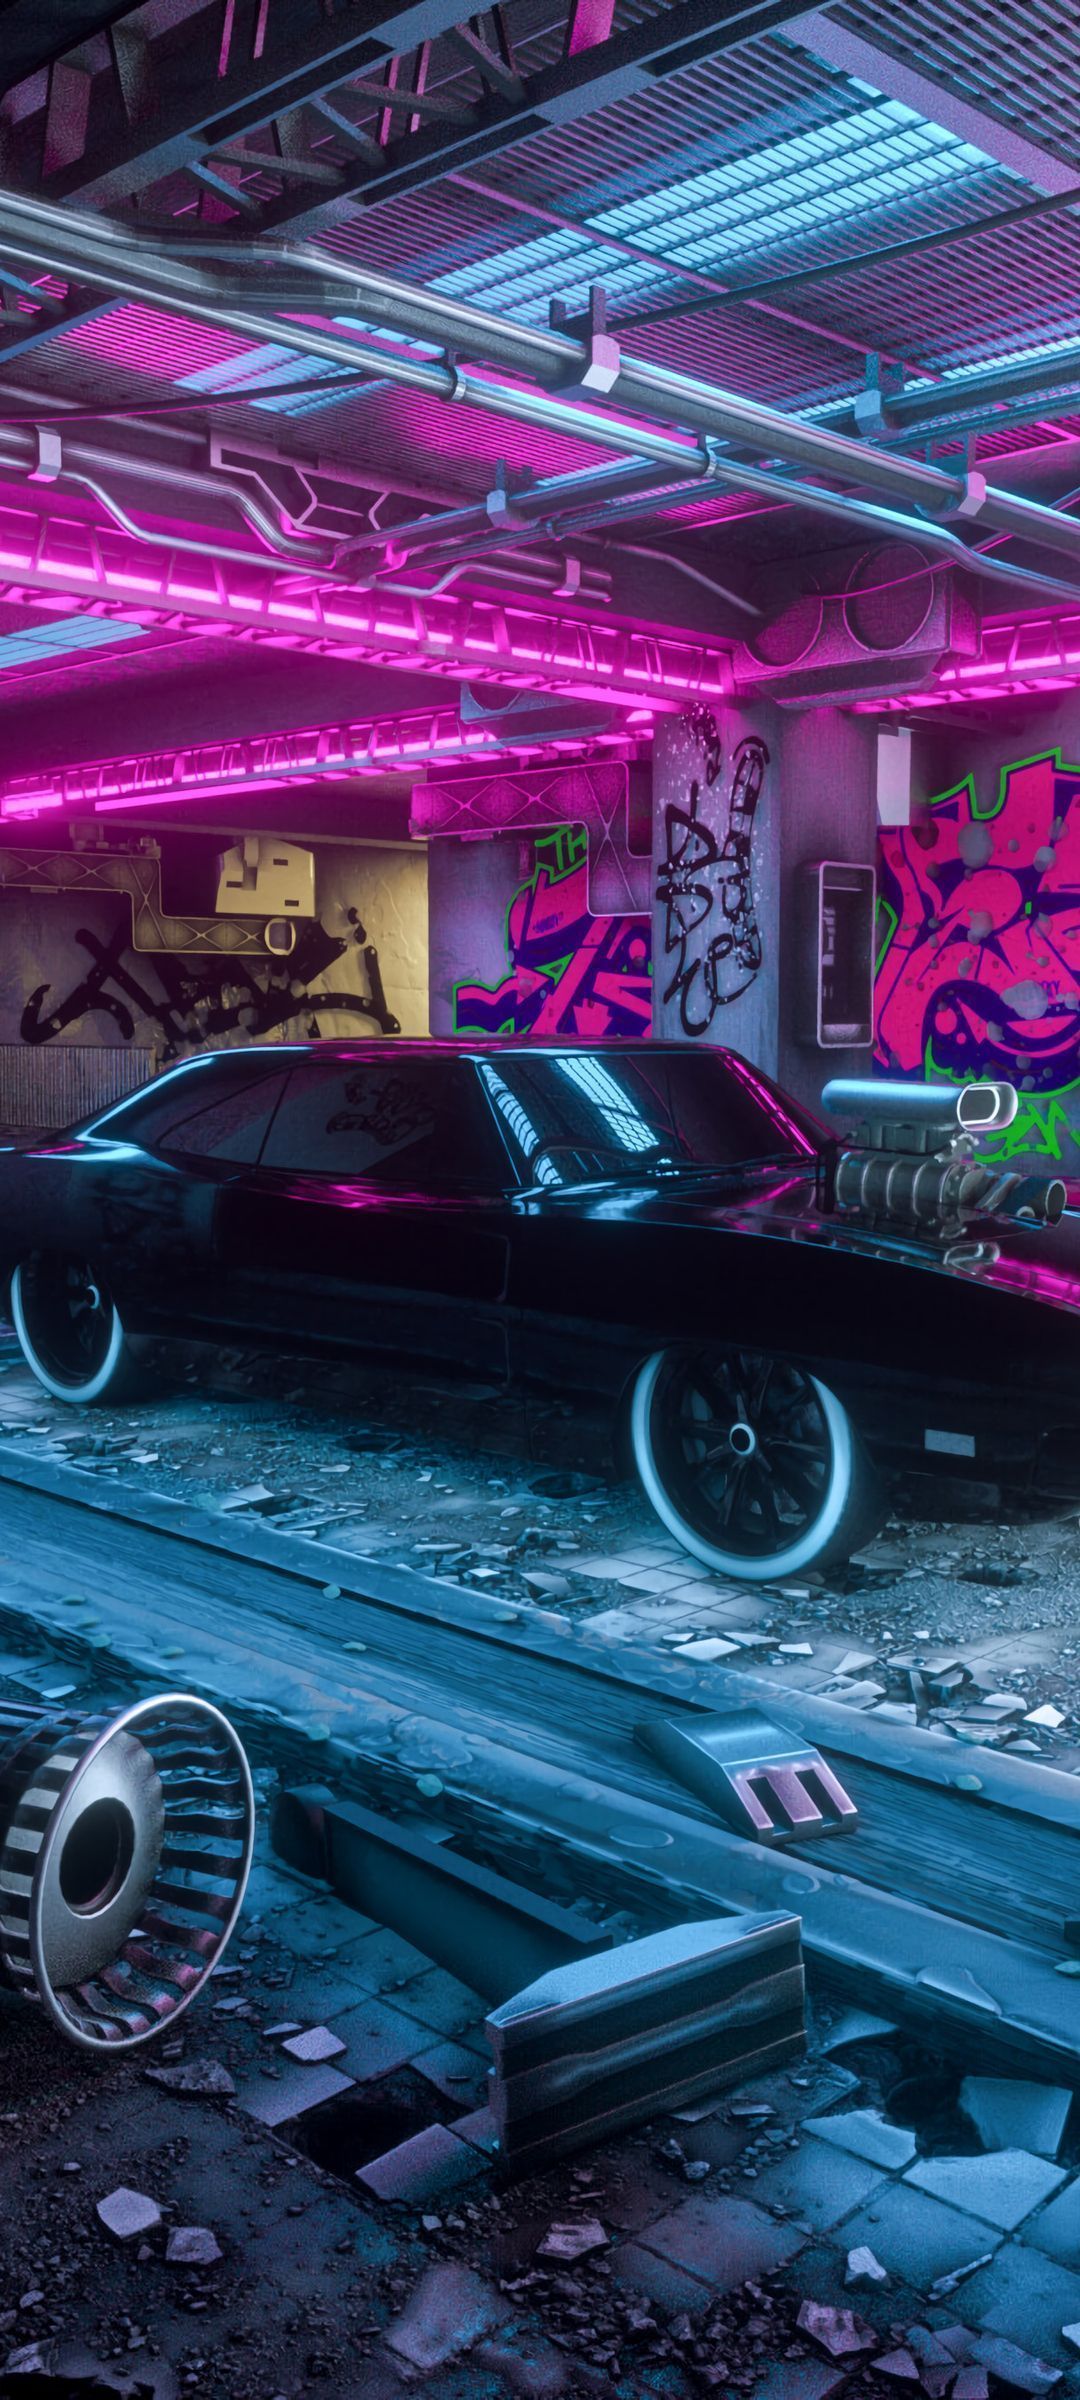 Download Garage, Retro Car, Dodge Charger Wallpaper in 1080x2400 Resolution